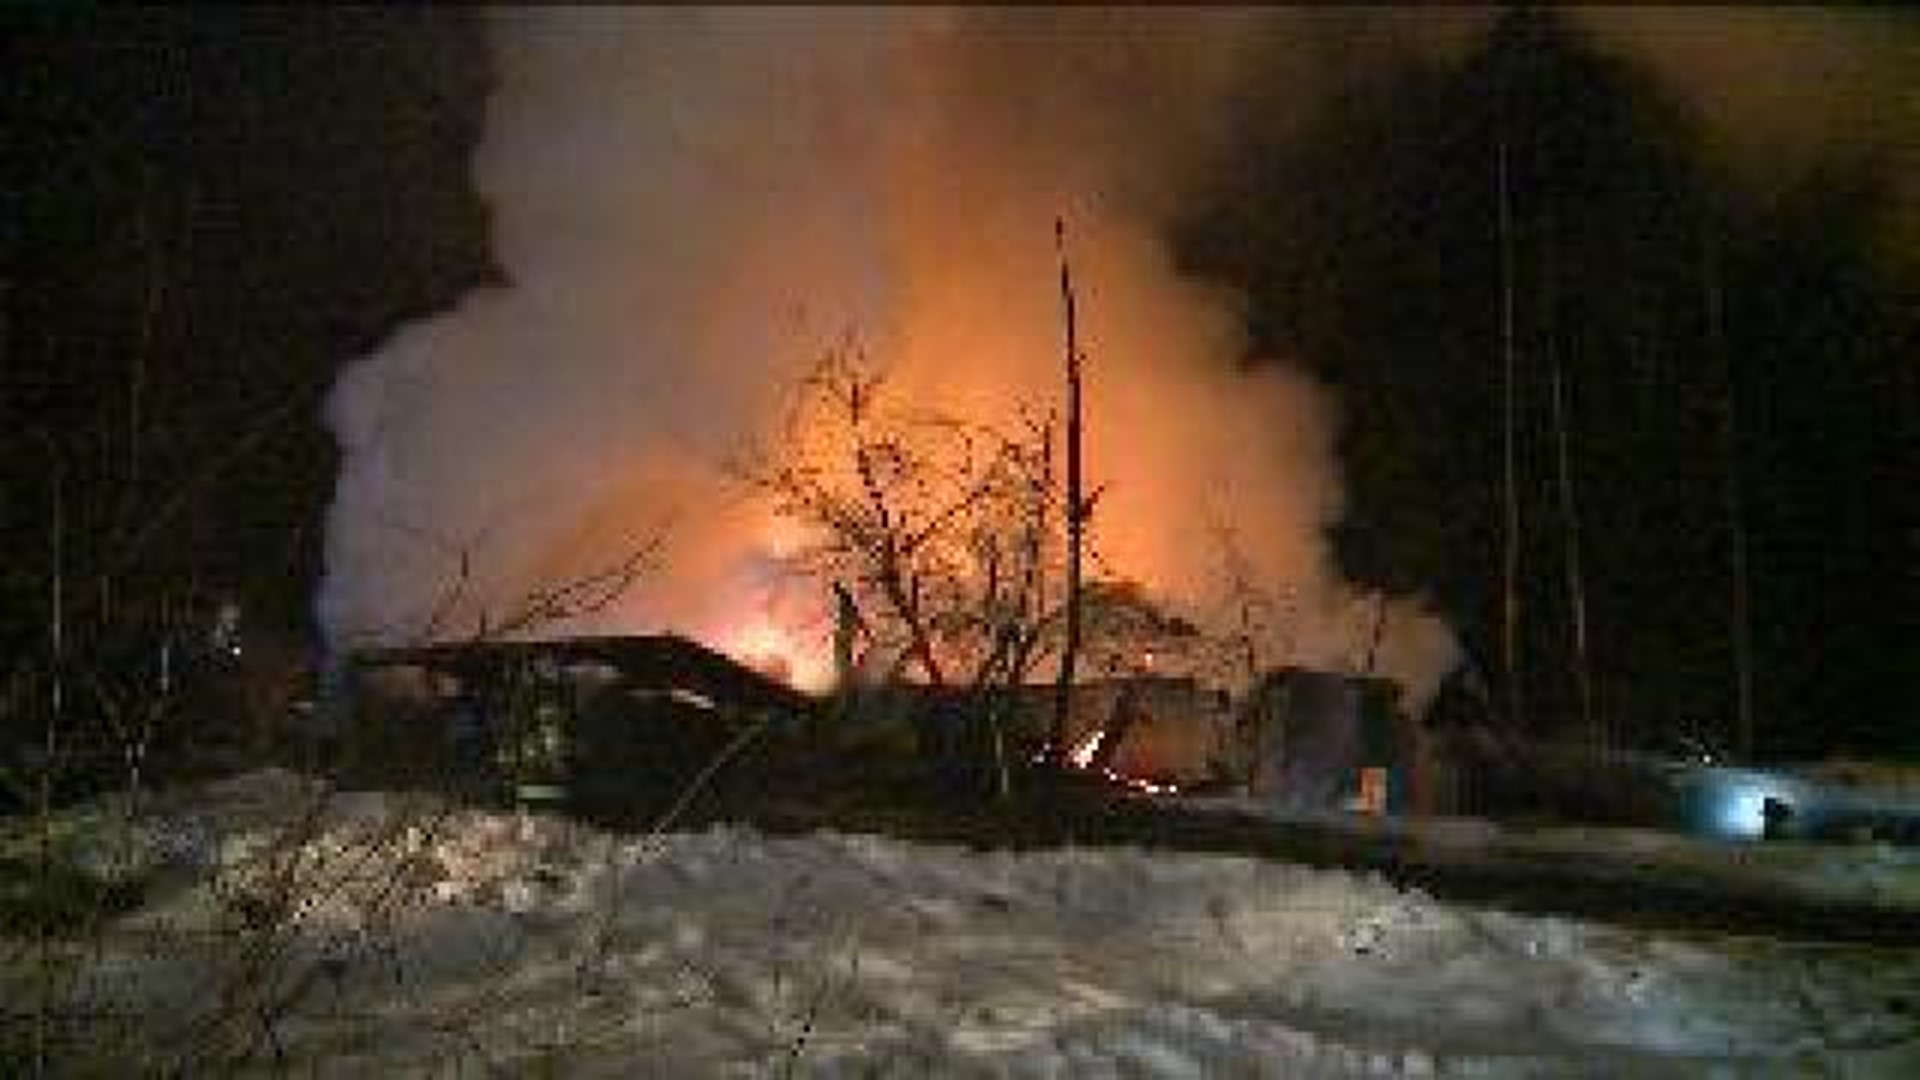 Fire Crews Battle Flames in Snow and Ice